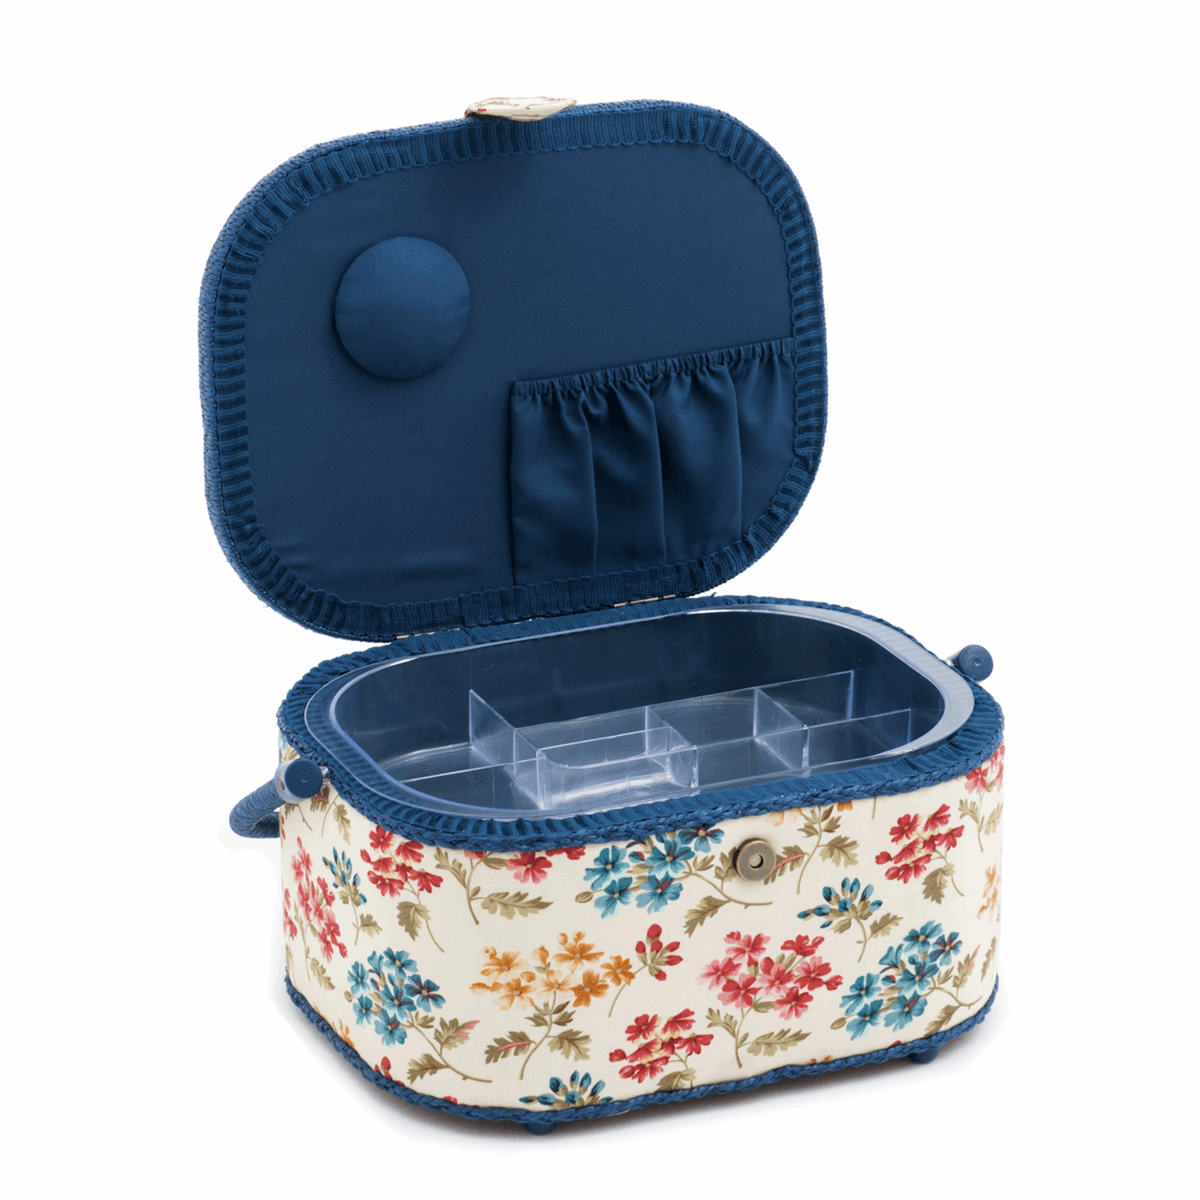 Fairfield Sewing Box - Large Oval